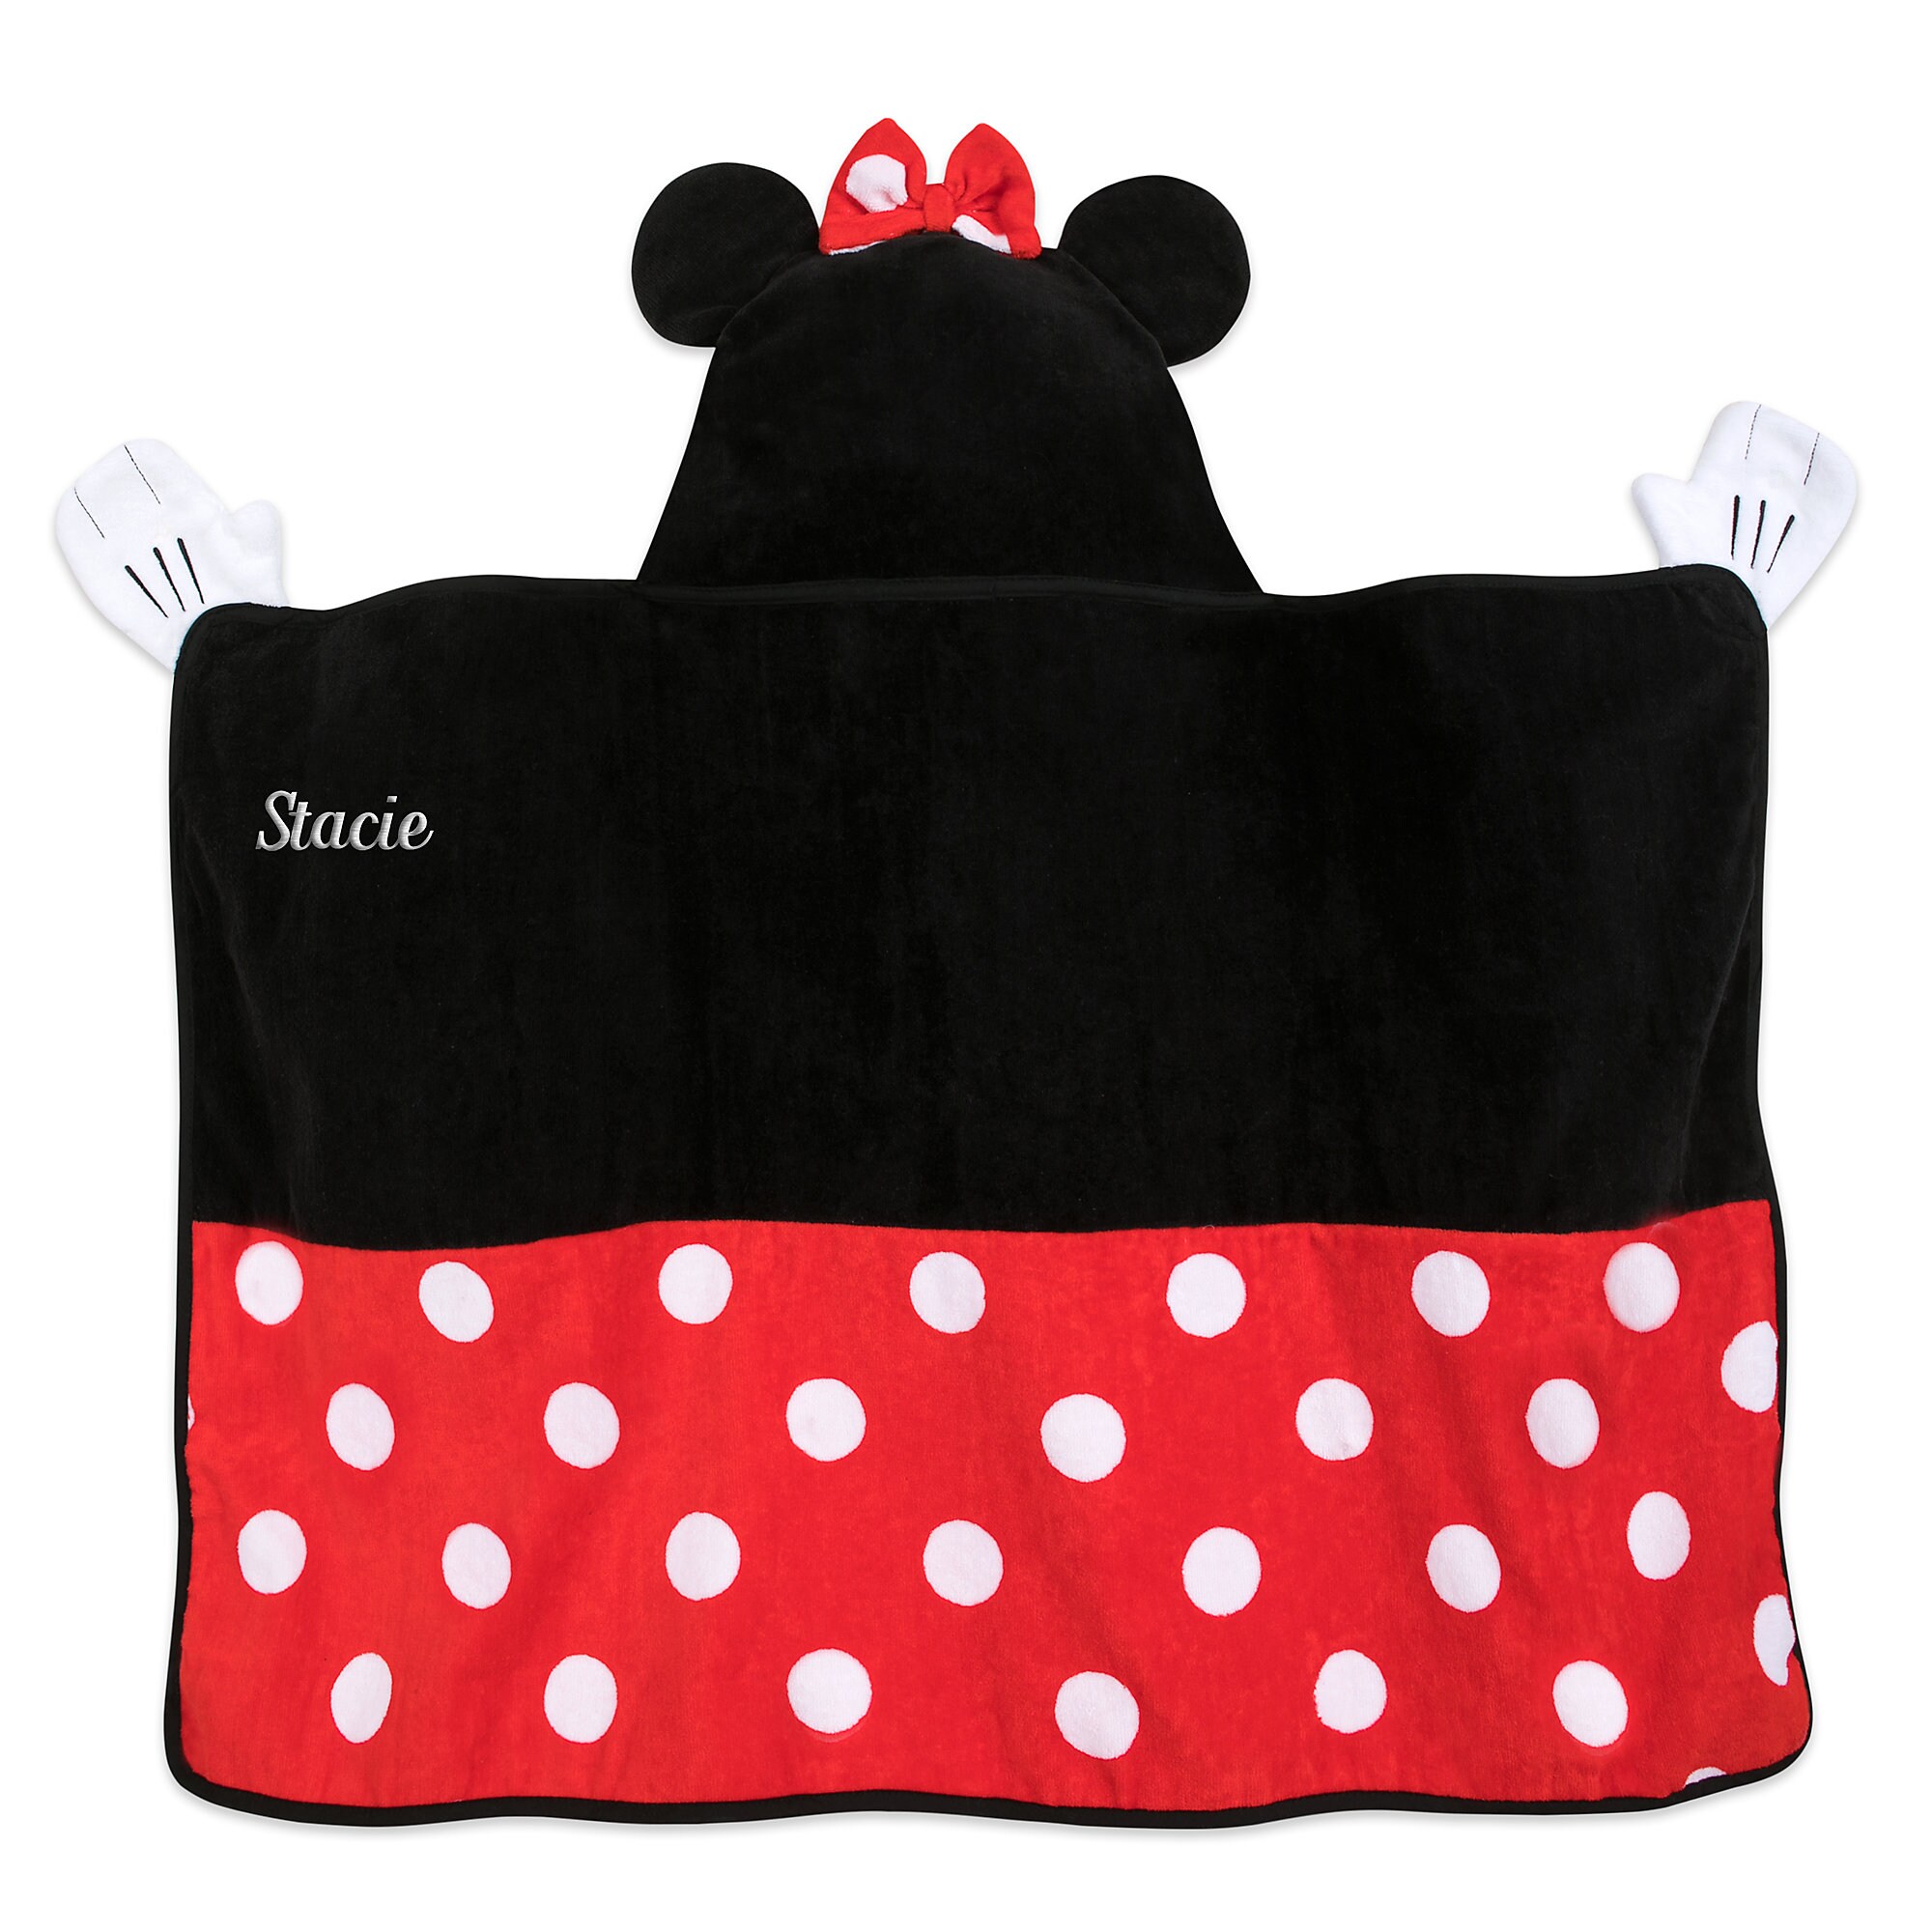 Minnie Mouse Hooded Towel for Baby - Personalized